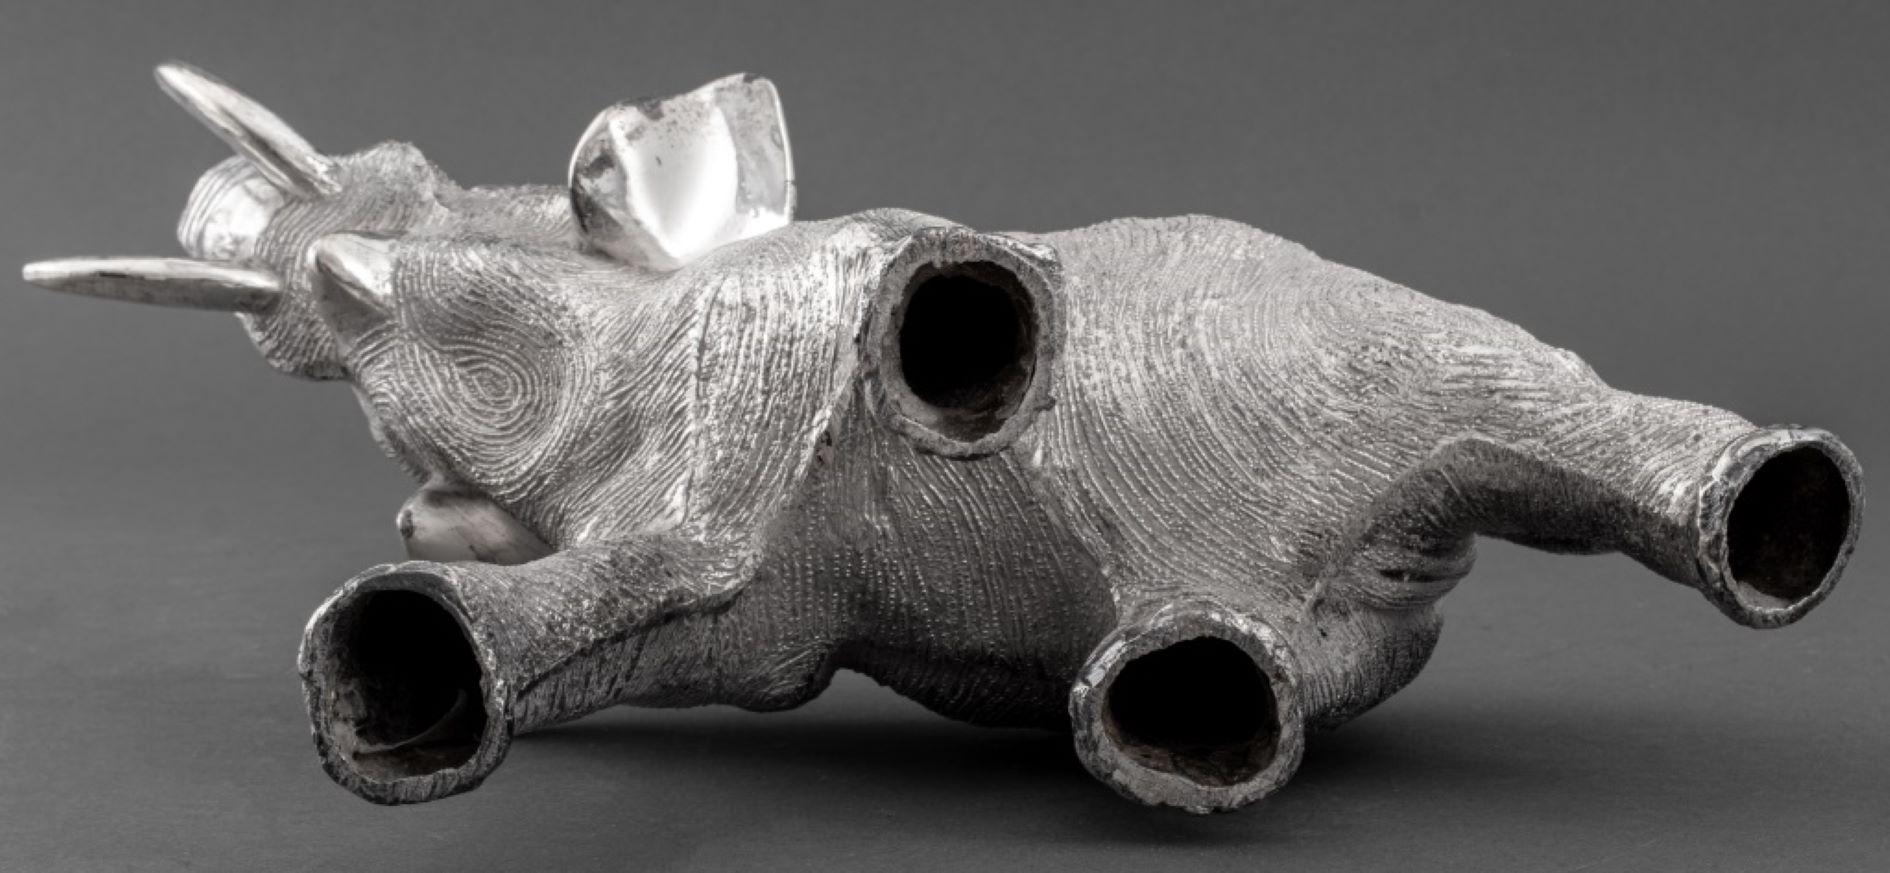 Silvered Elephant Sculpture, 20th Century 7